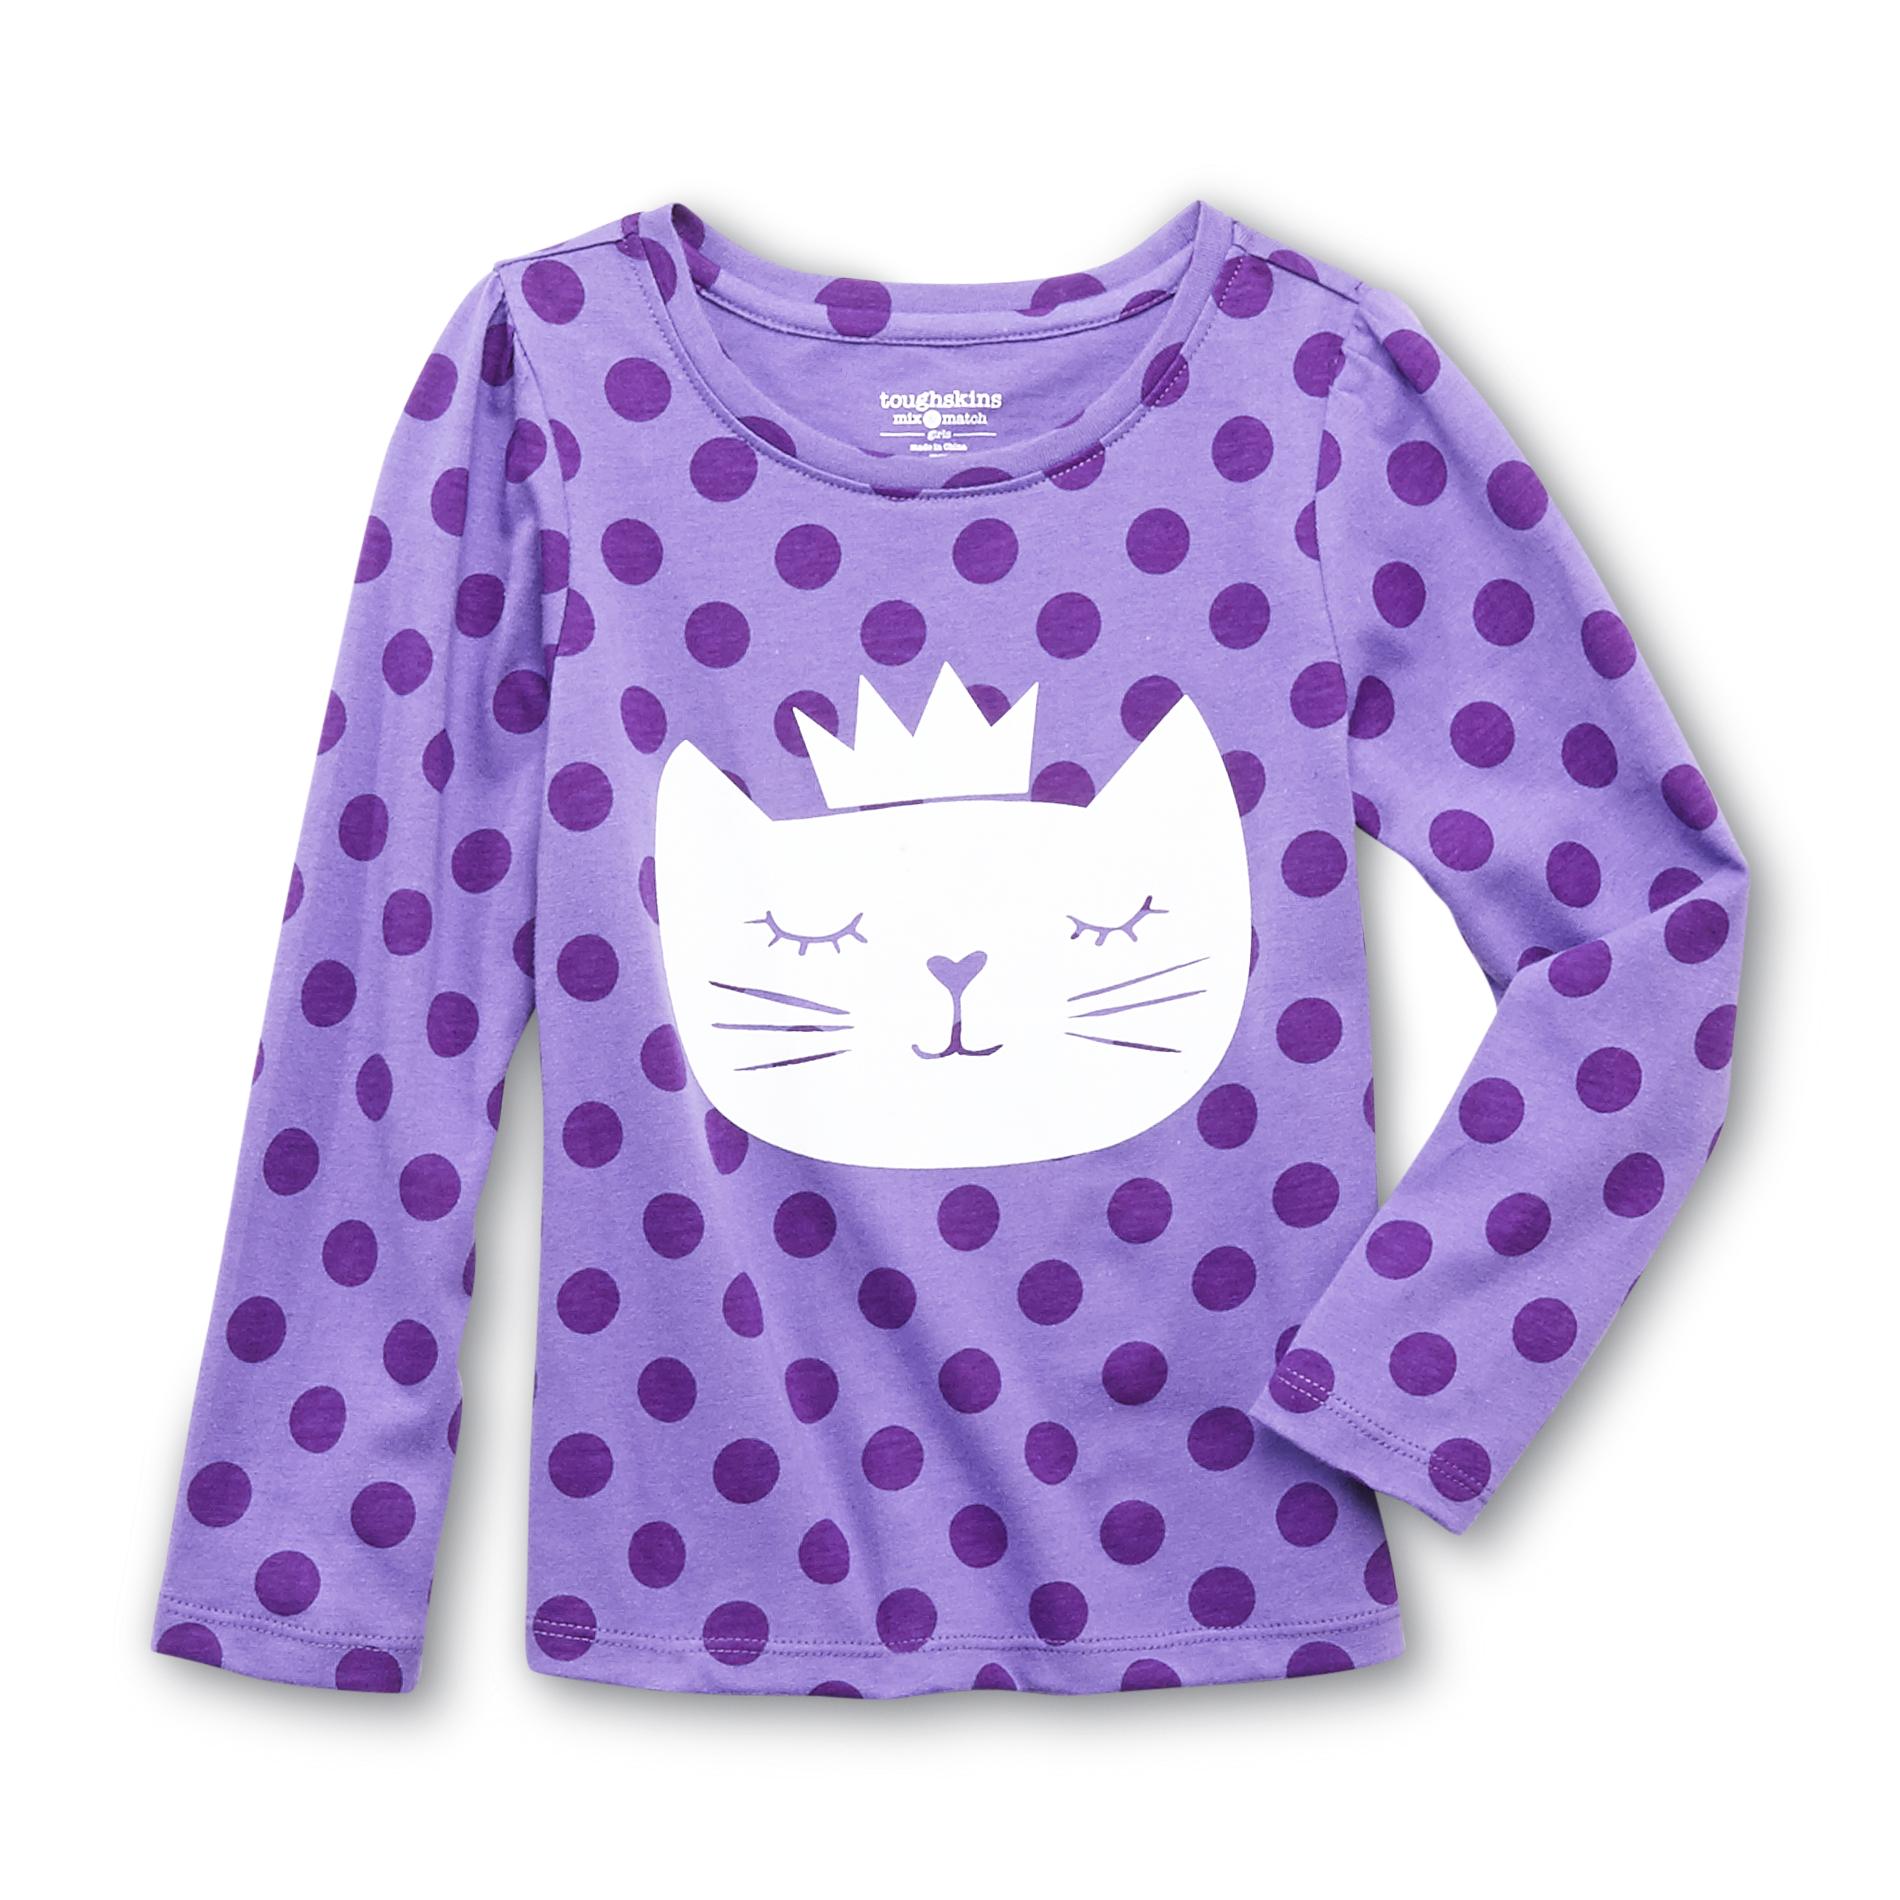 Toughskins Infant & Toddler Girl's Graphic Long-Sleeve T-Shirt - Cat Crown